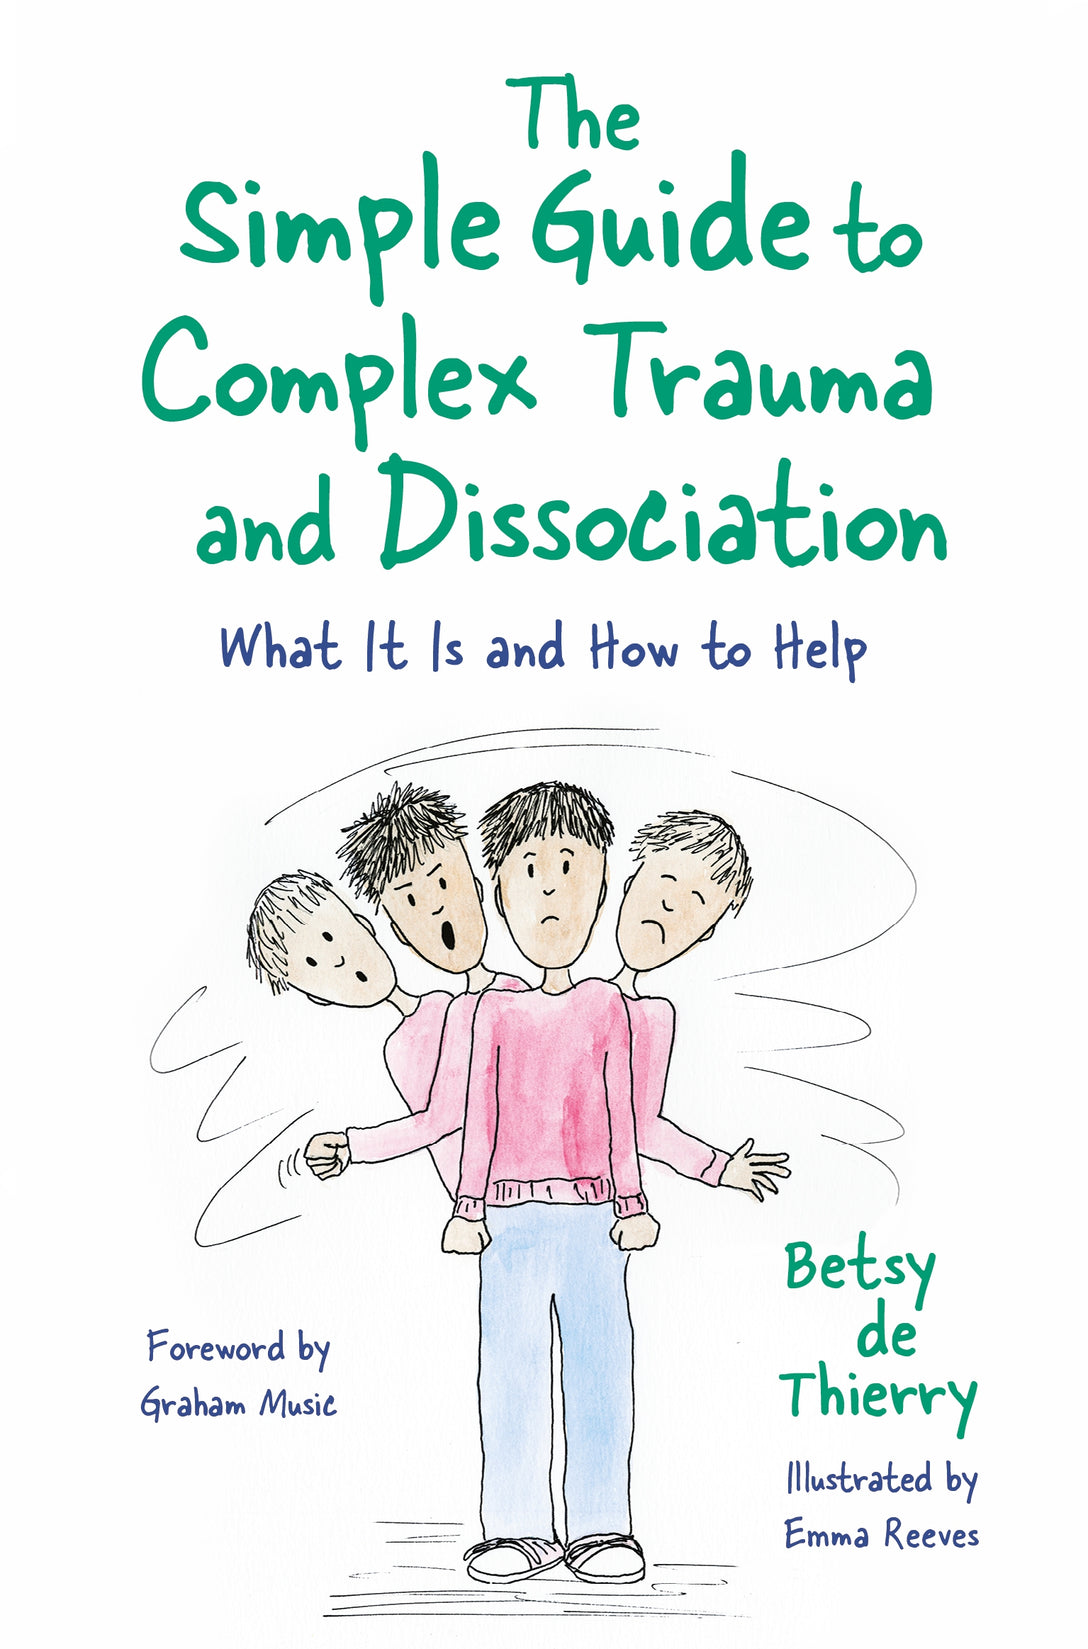 The Simple Guide to Complex Trauma and Dissociation by Betsy de Thierry, Emma Reeves, Graham Music